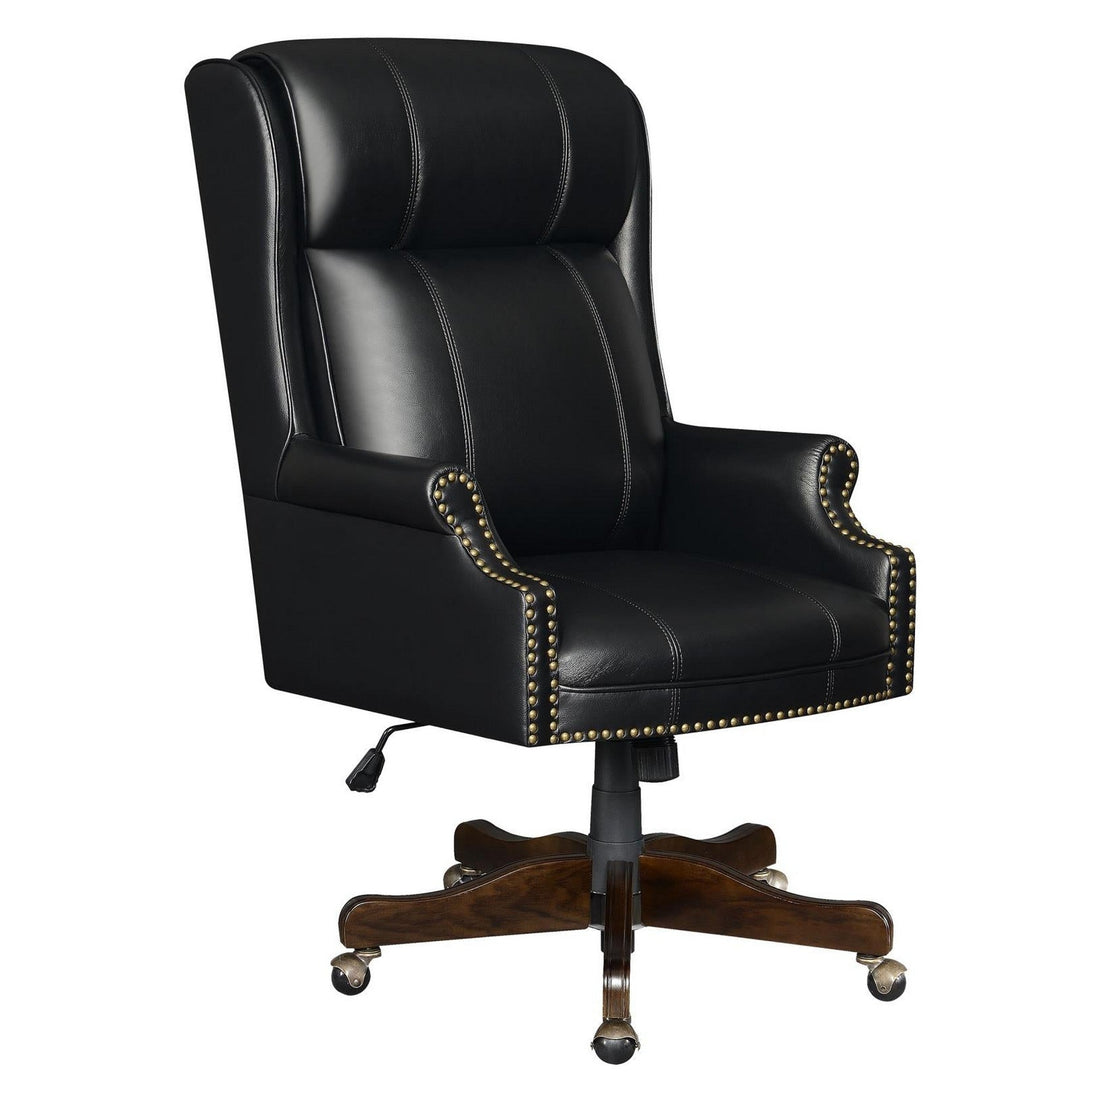 Upholstered Office Chair with Casters Black and Dark Cherry 802077